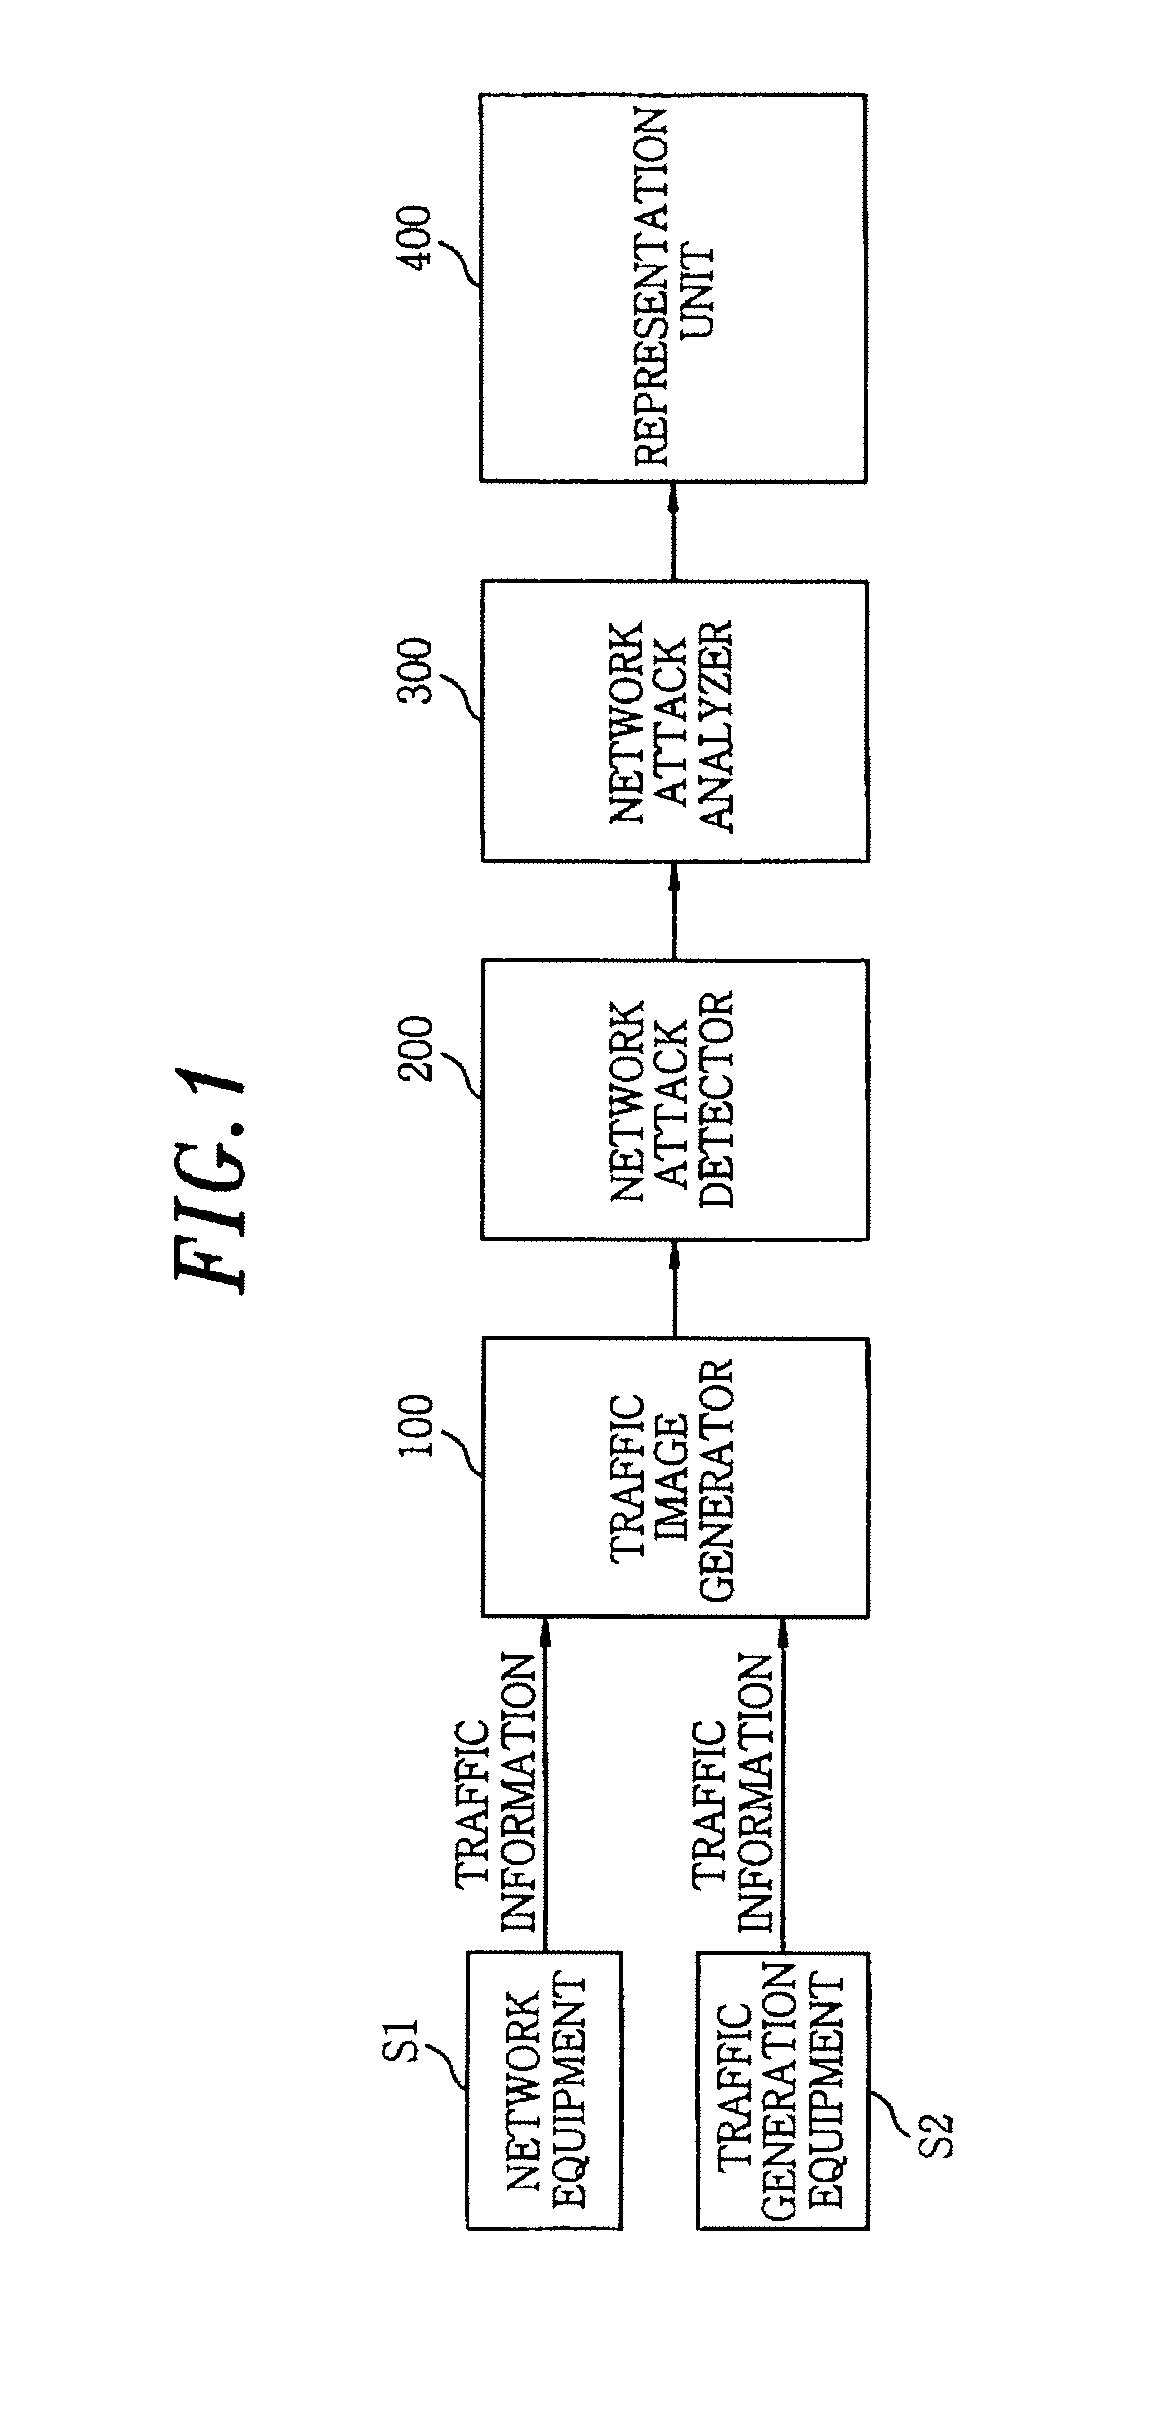 Apparatus and method for detecting network attack based on visual data analysis